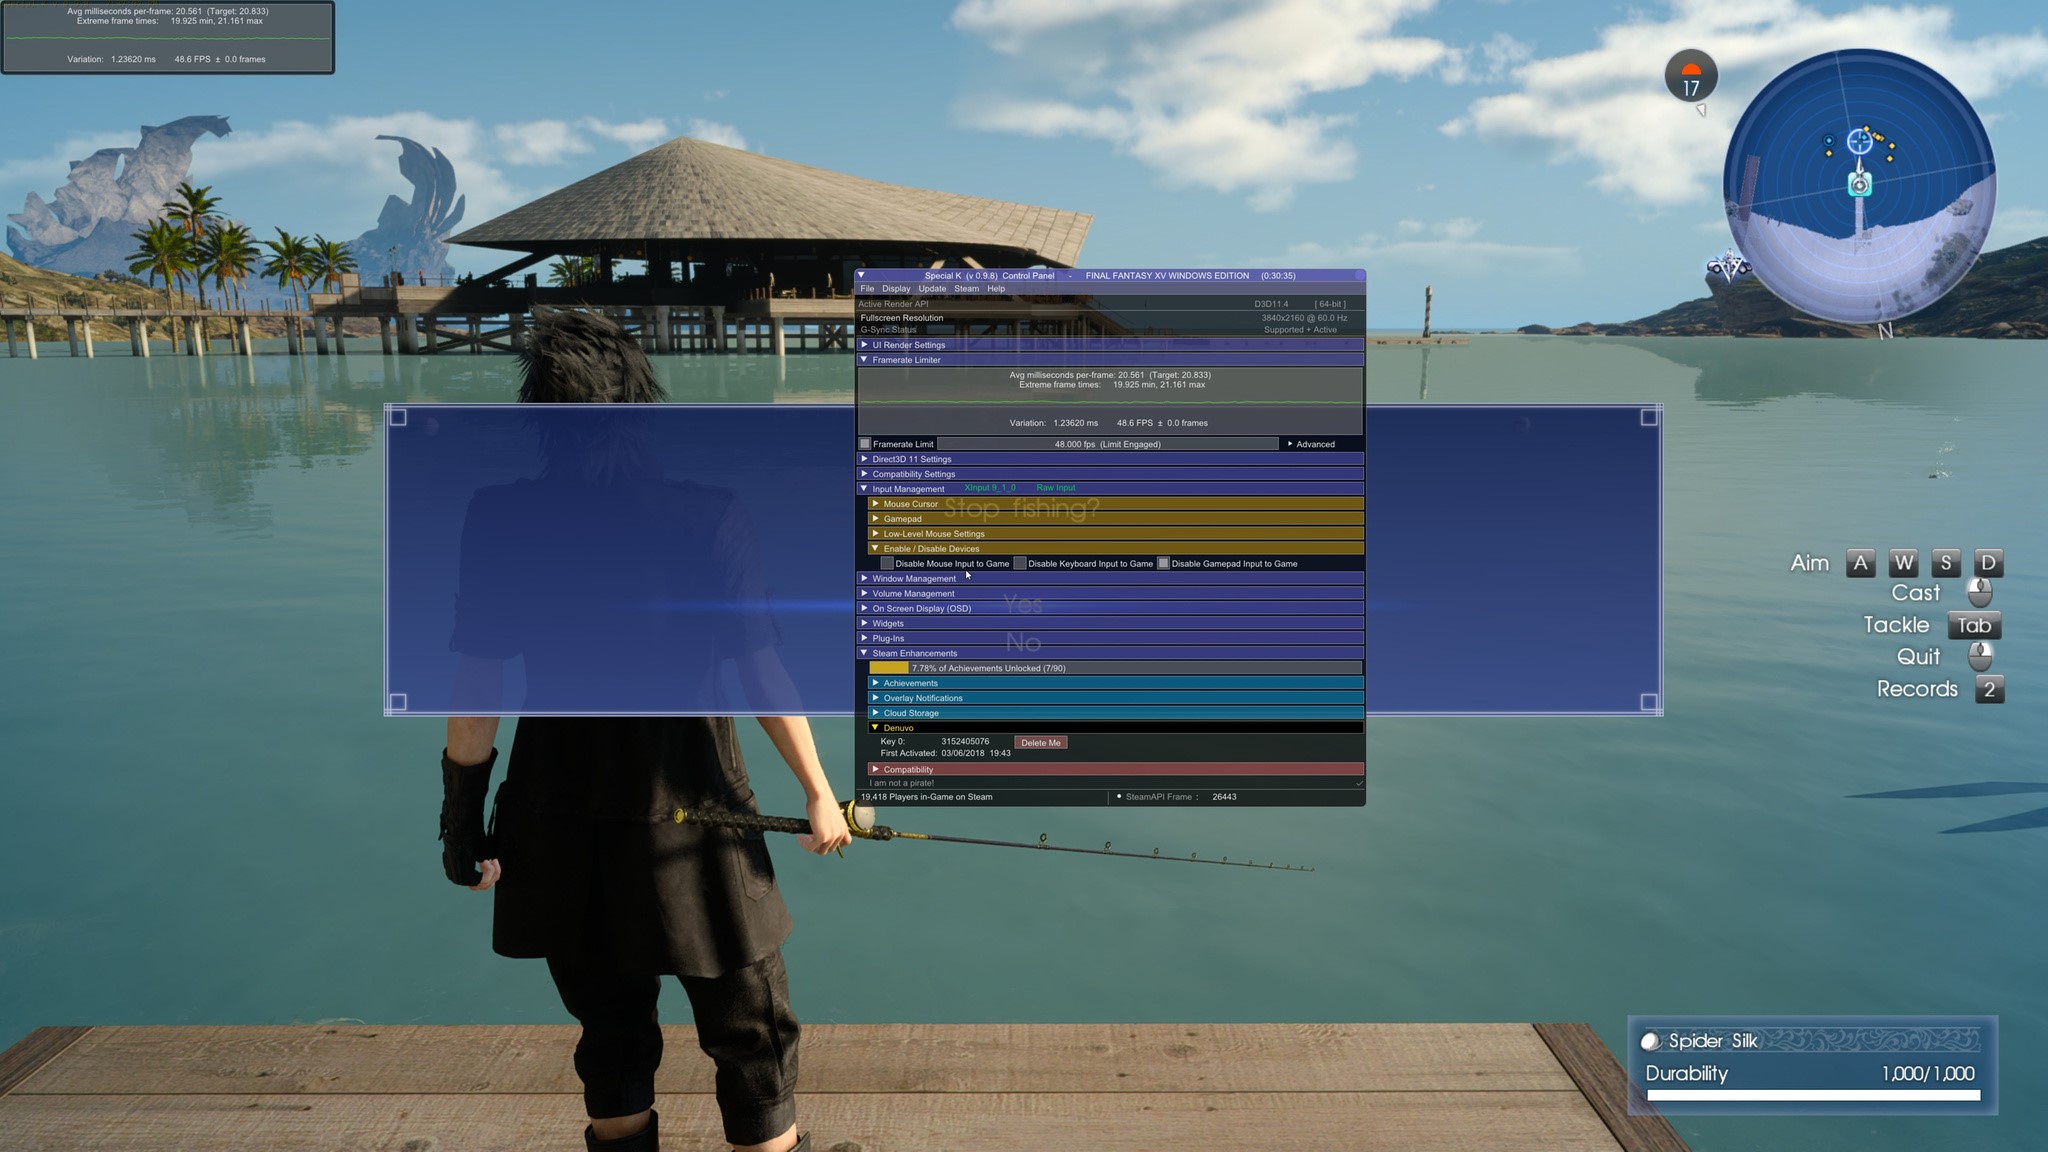 FINAL FANTASY XV WINDOWS EDITION Playable Demo instal the last version for iphone